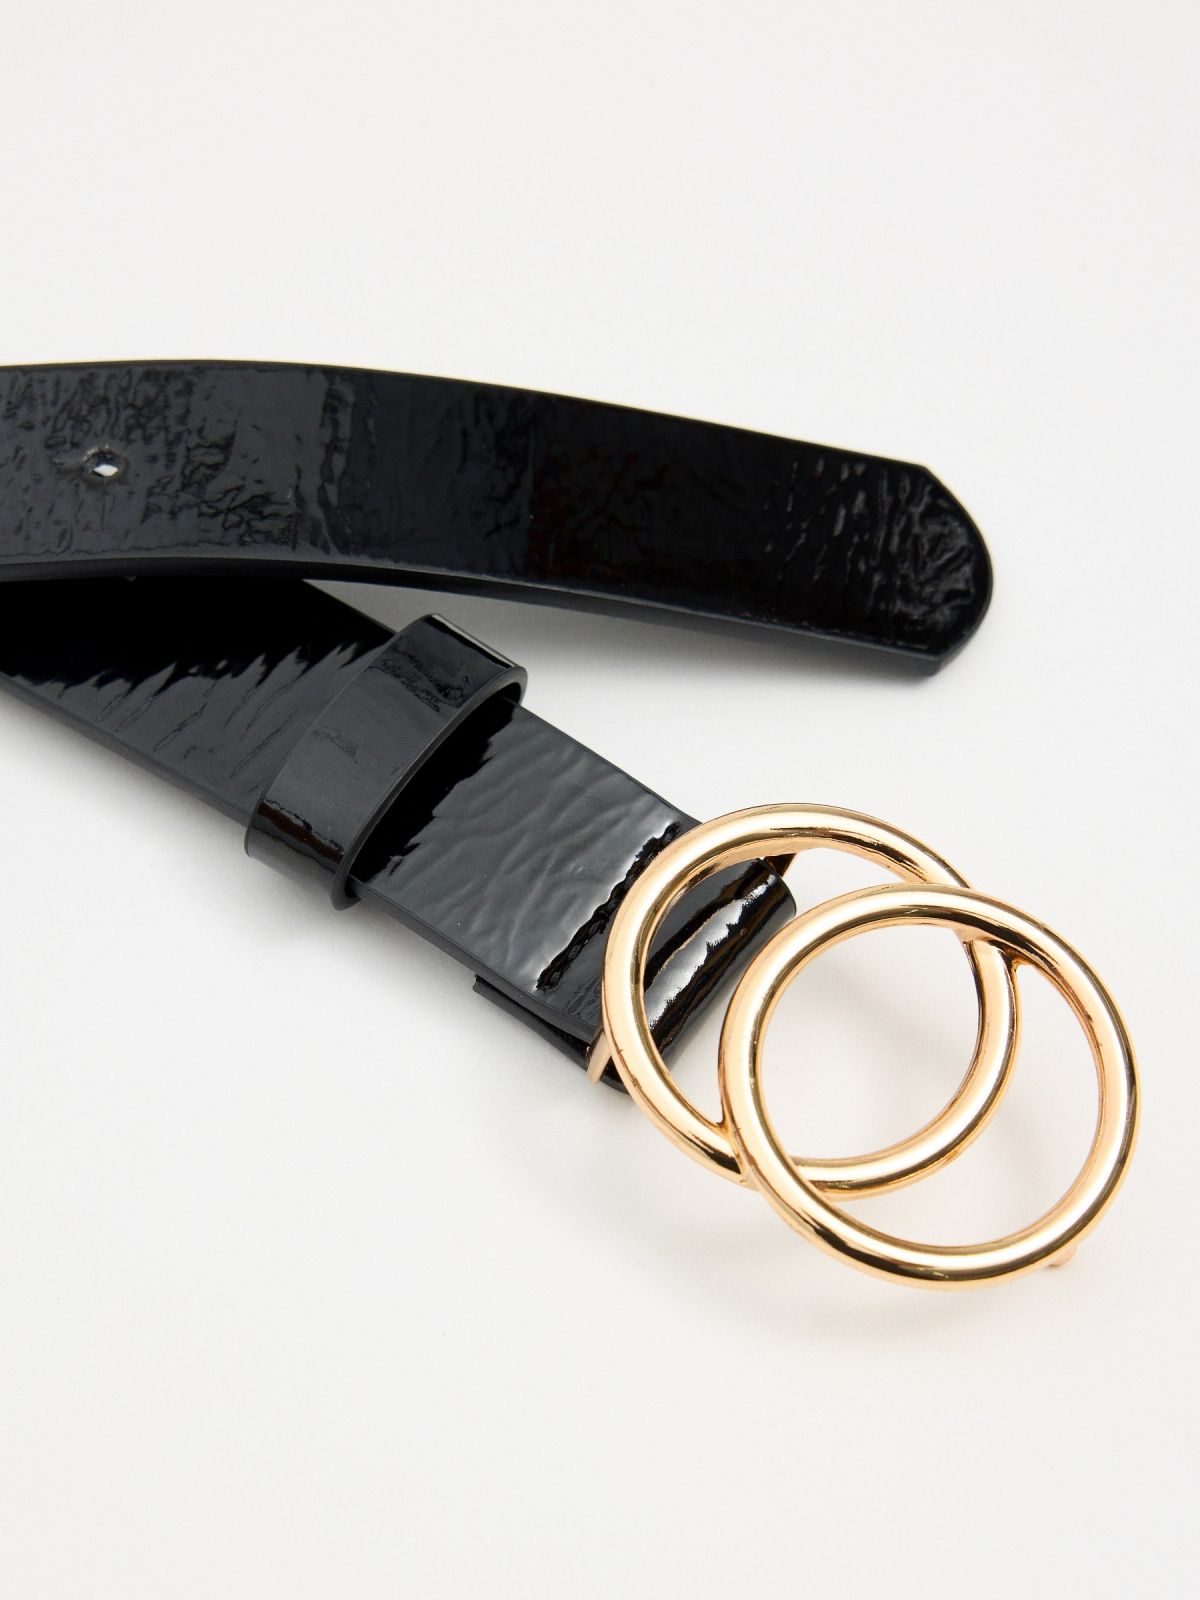 Patent leather belt with gold buckle black detail view